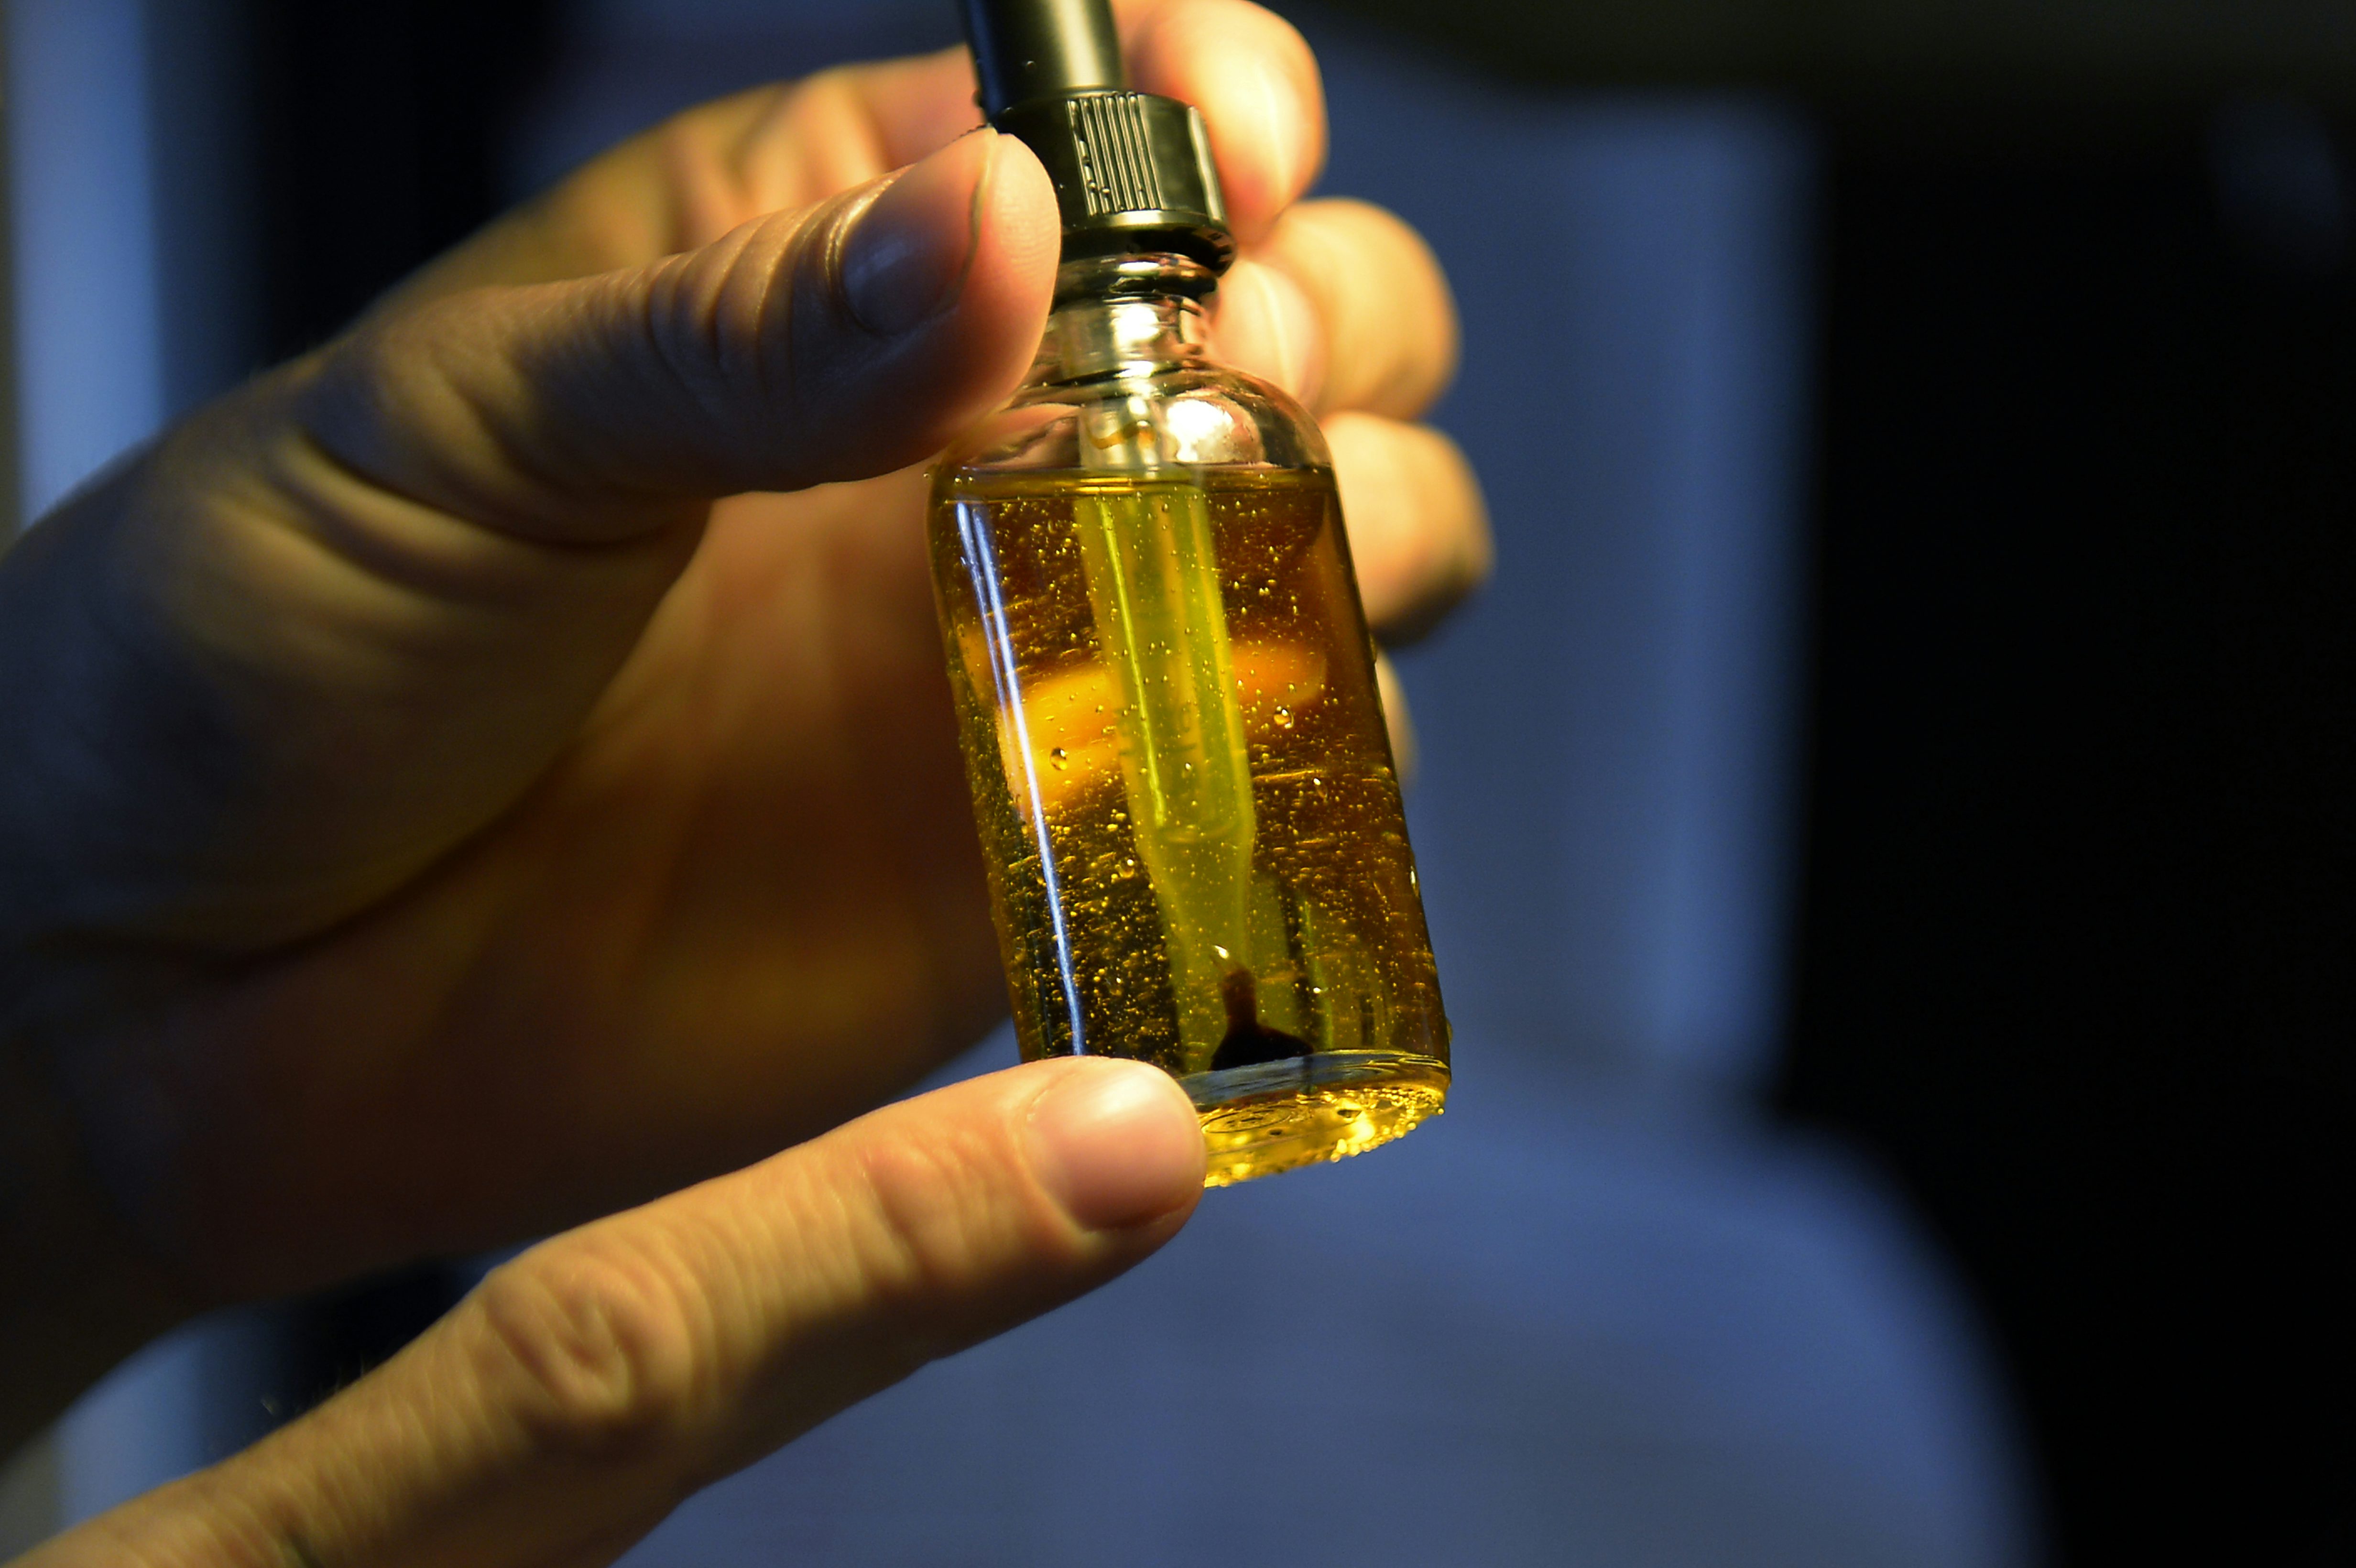 GettyImages 460572282 U.S. Officials Urge States To Regulate Synthetic CBD Oil After Poisoning Cases